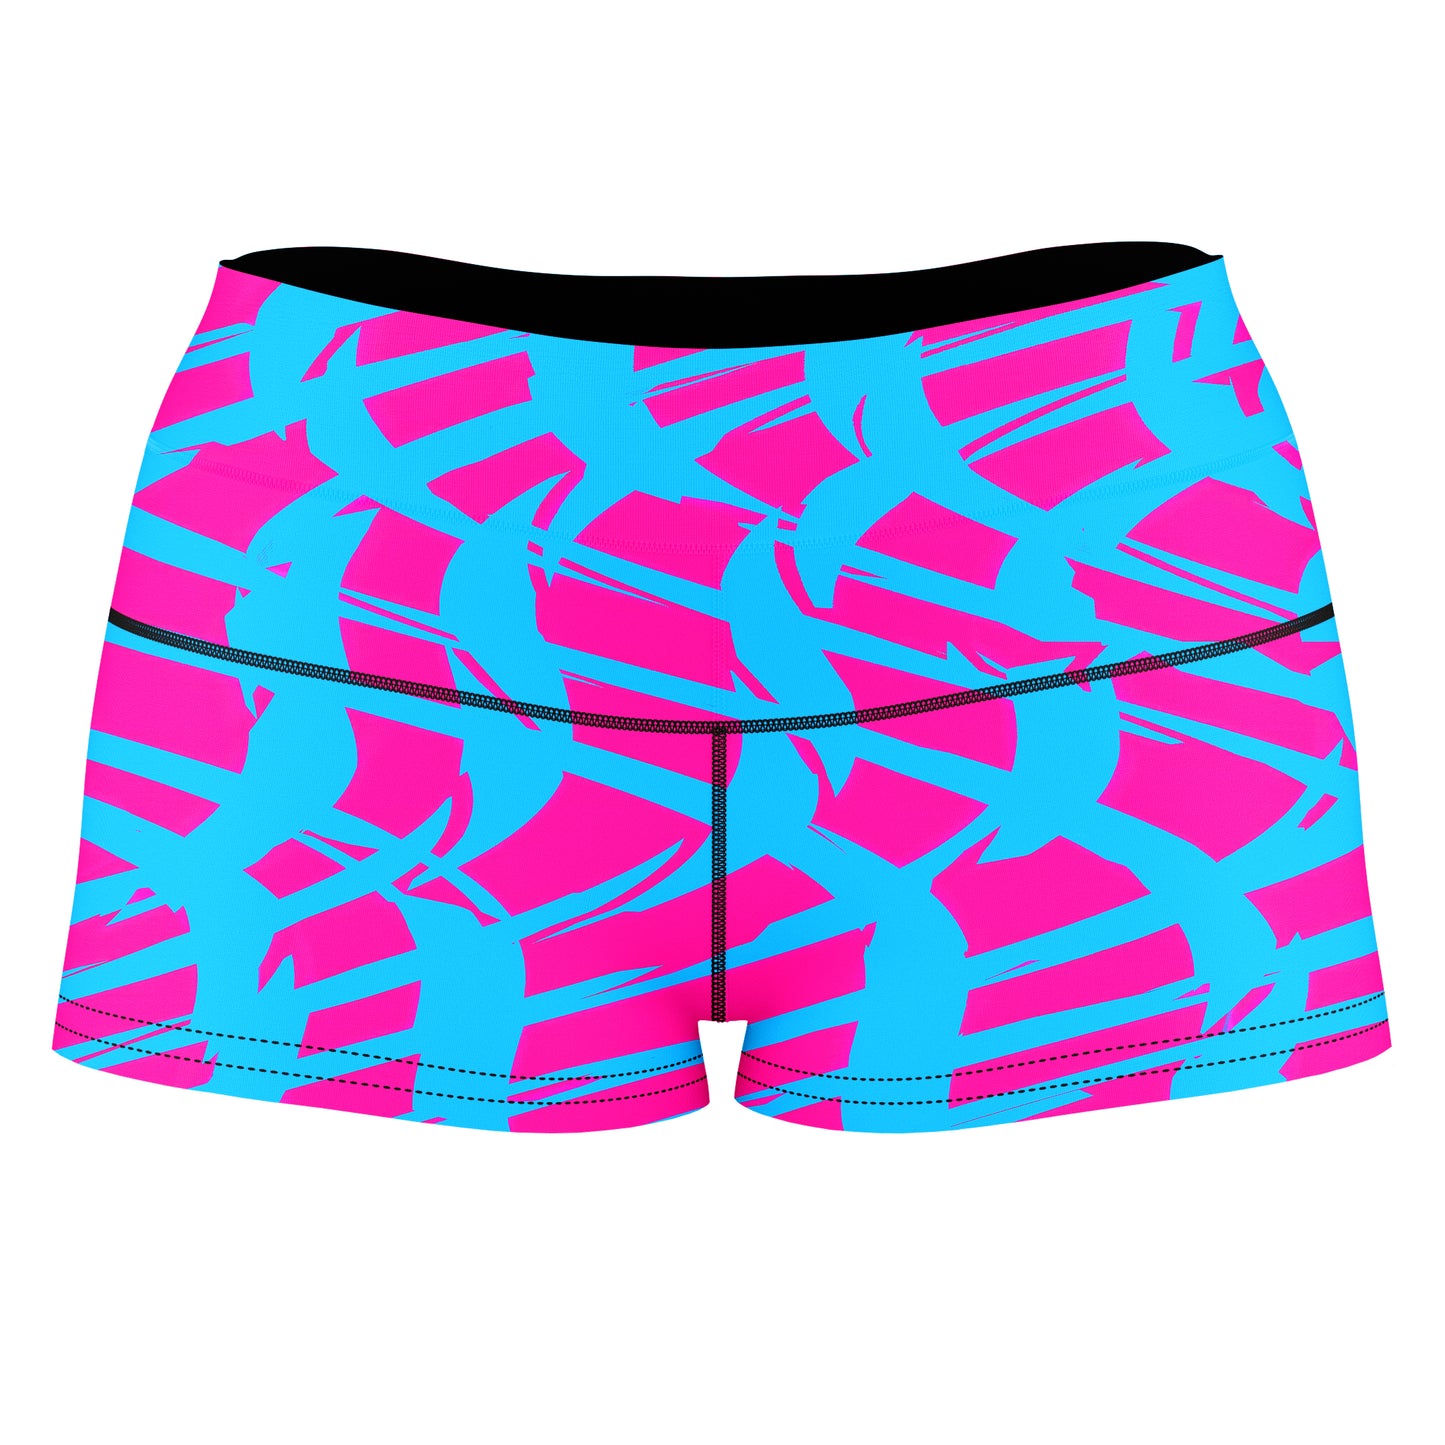 Pink and Blue Squiggly Rave Checkered High-Waisted Women's Shorts, Big Tex Funkadelic, | iEDM